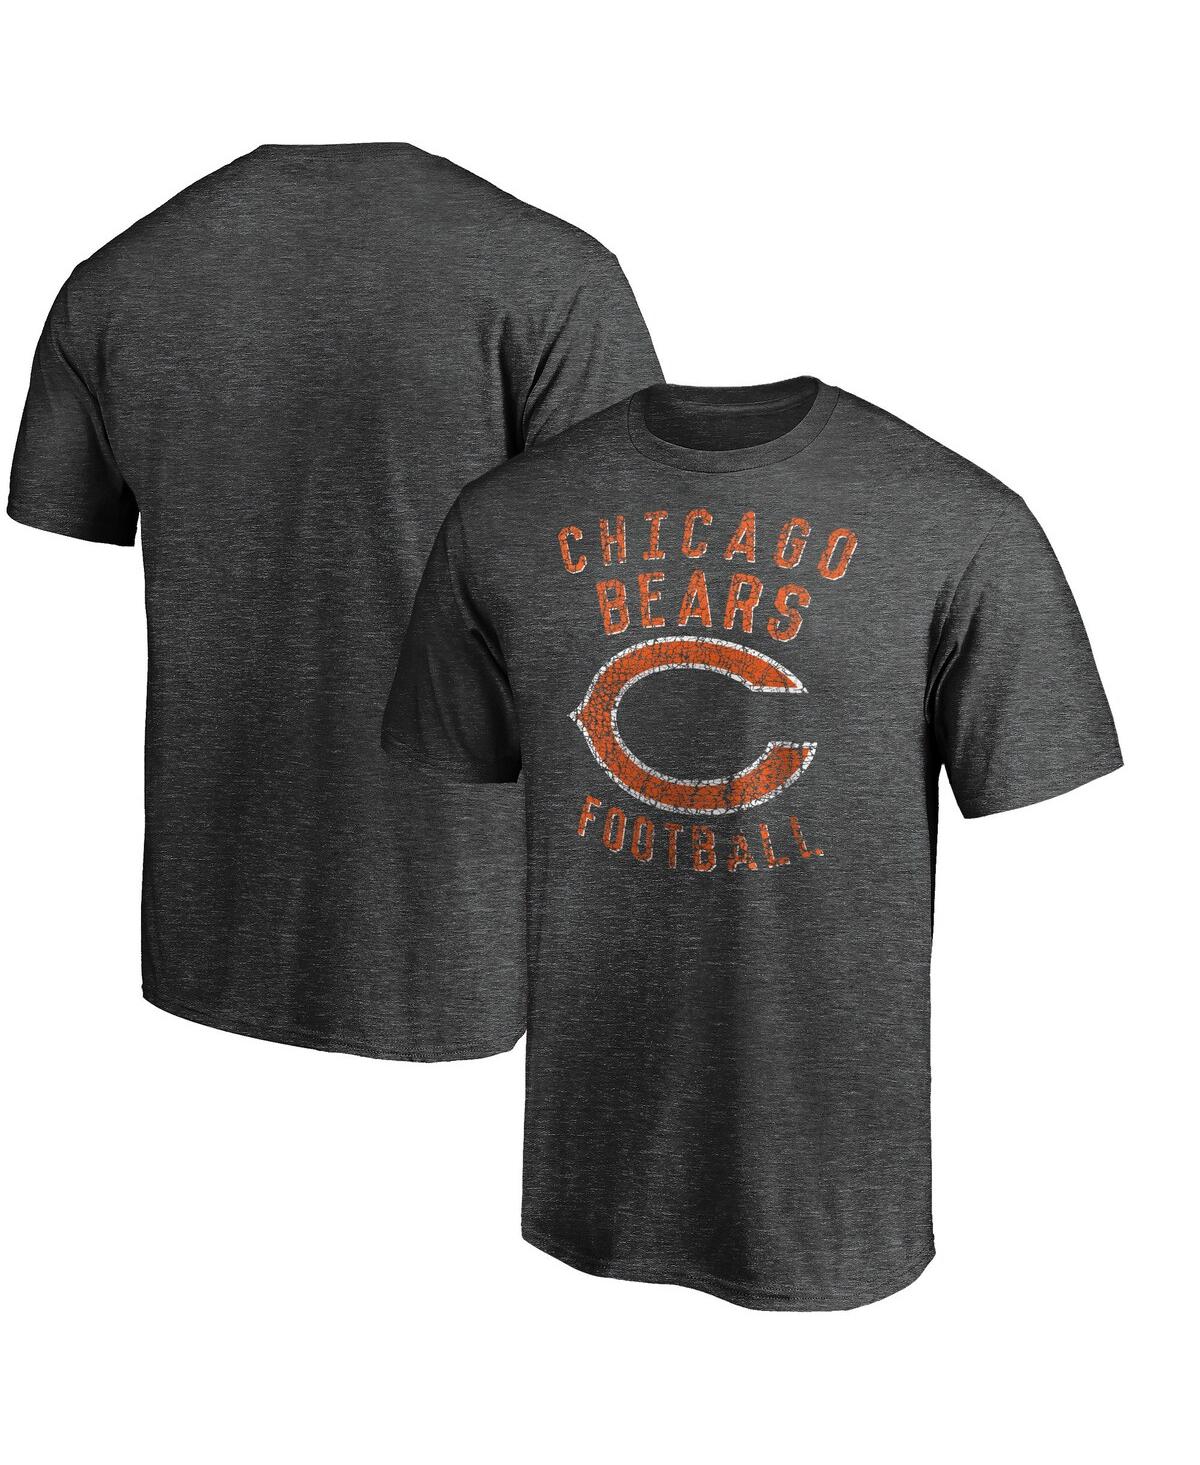 UPC 194321000082 product image for Men's Majestic Heathered Charcoal Chicago Bears Showtime Logo T-shirt | upcitemdb.com